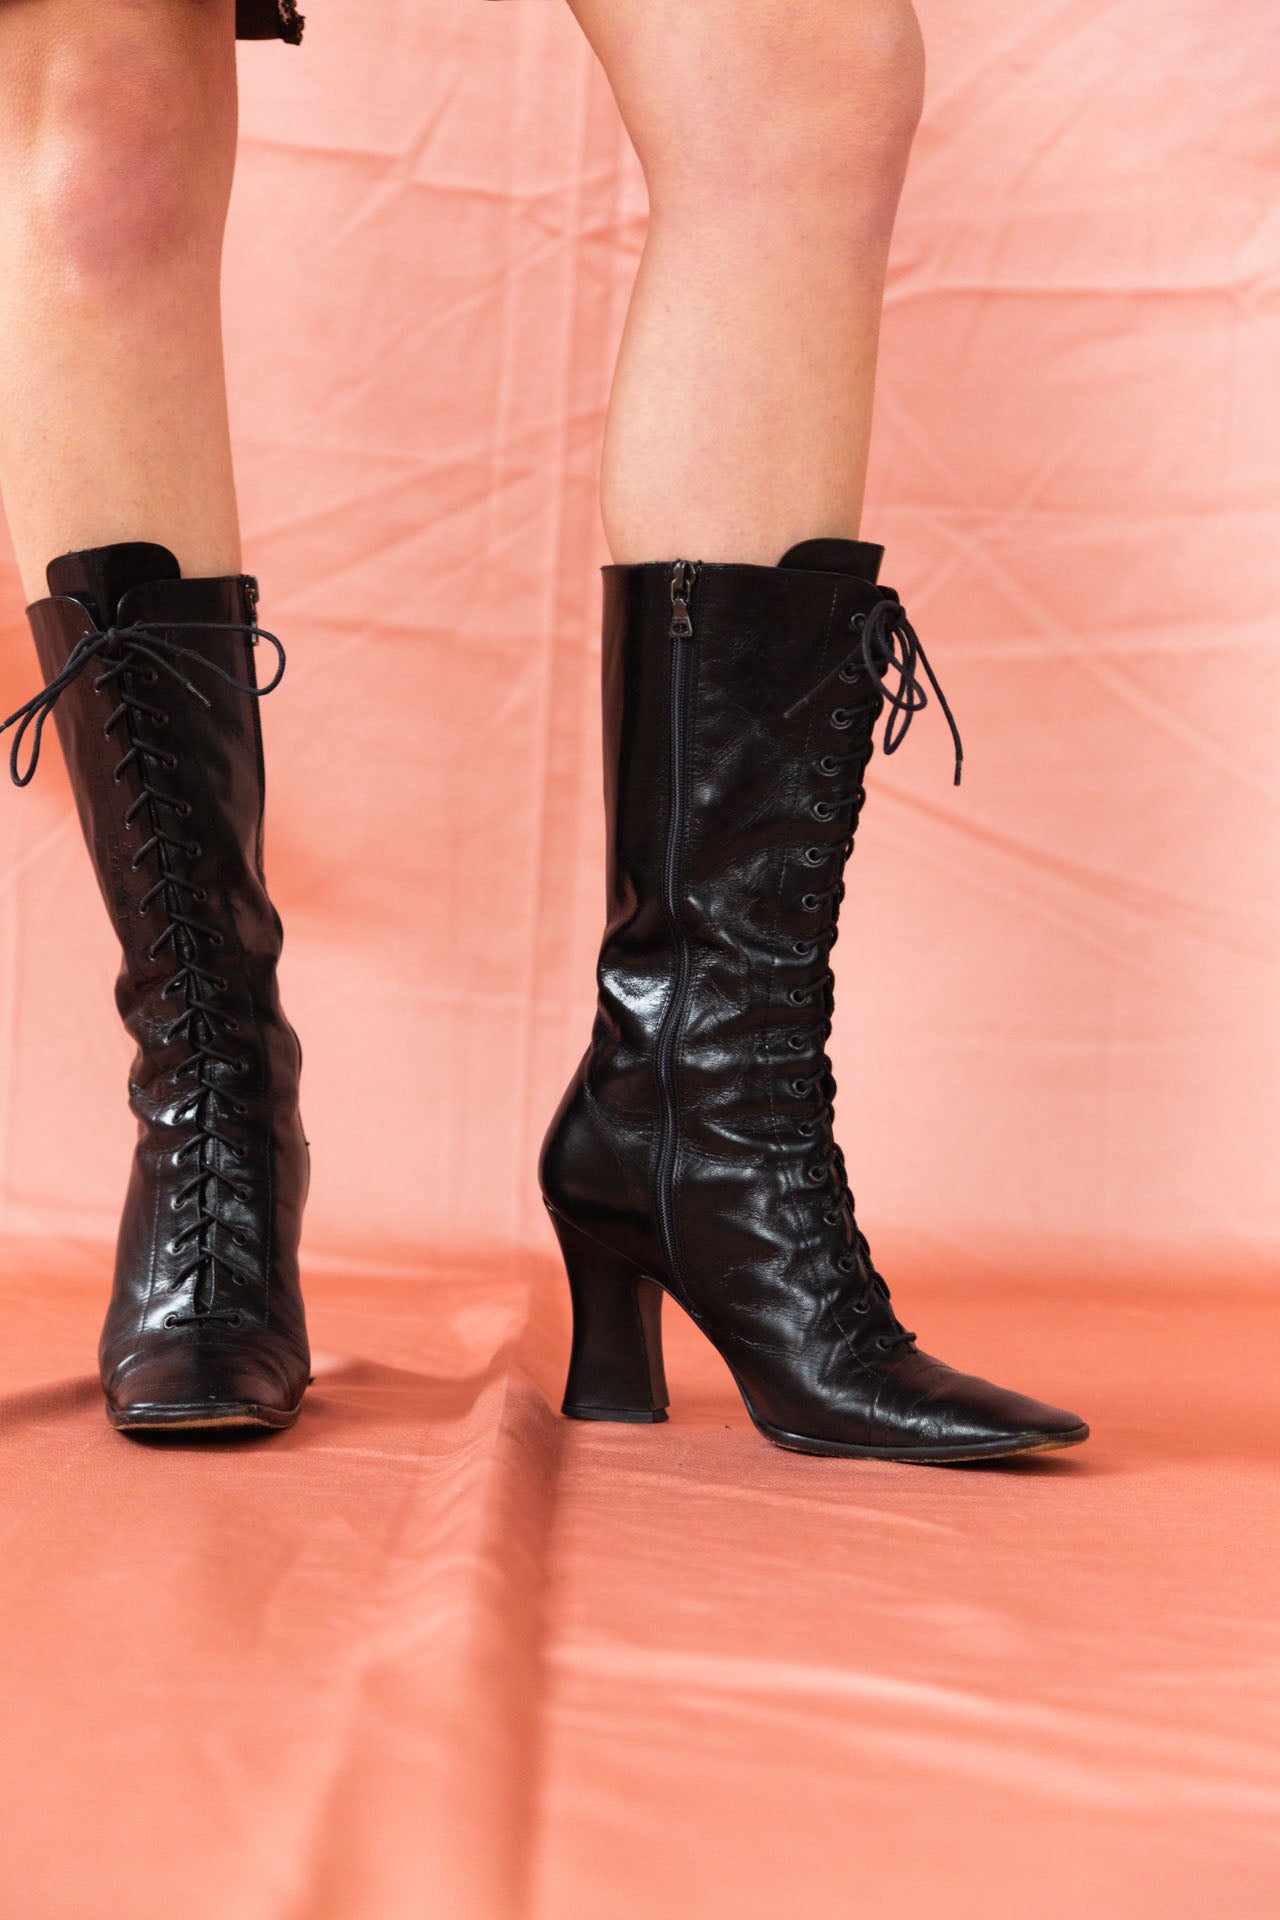 Lace up Prada Boots